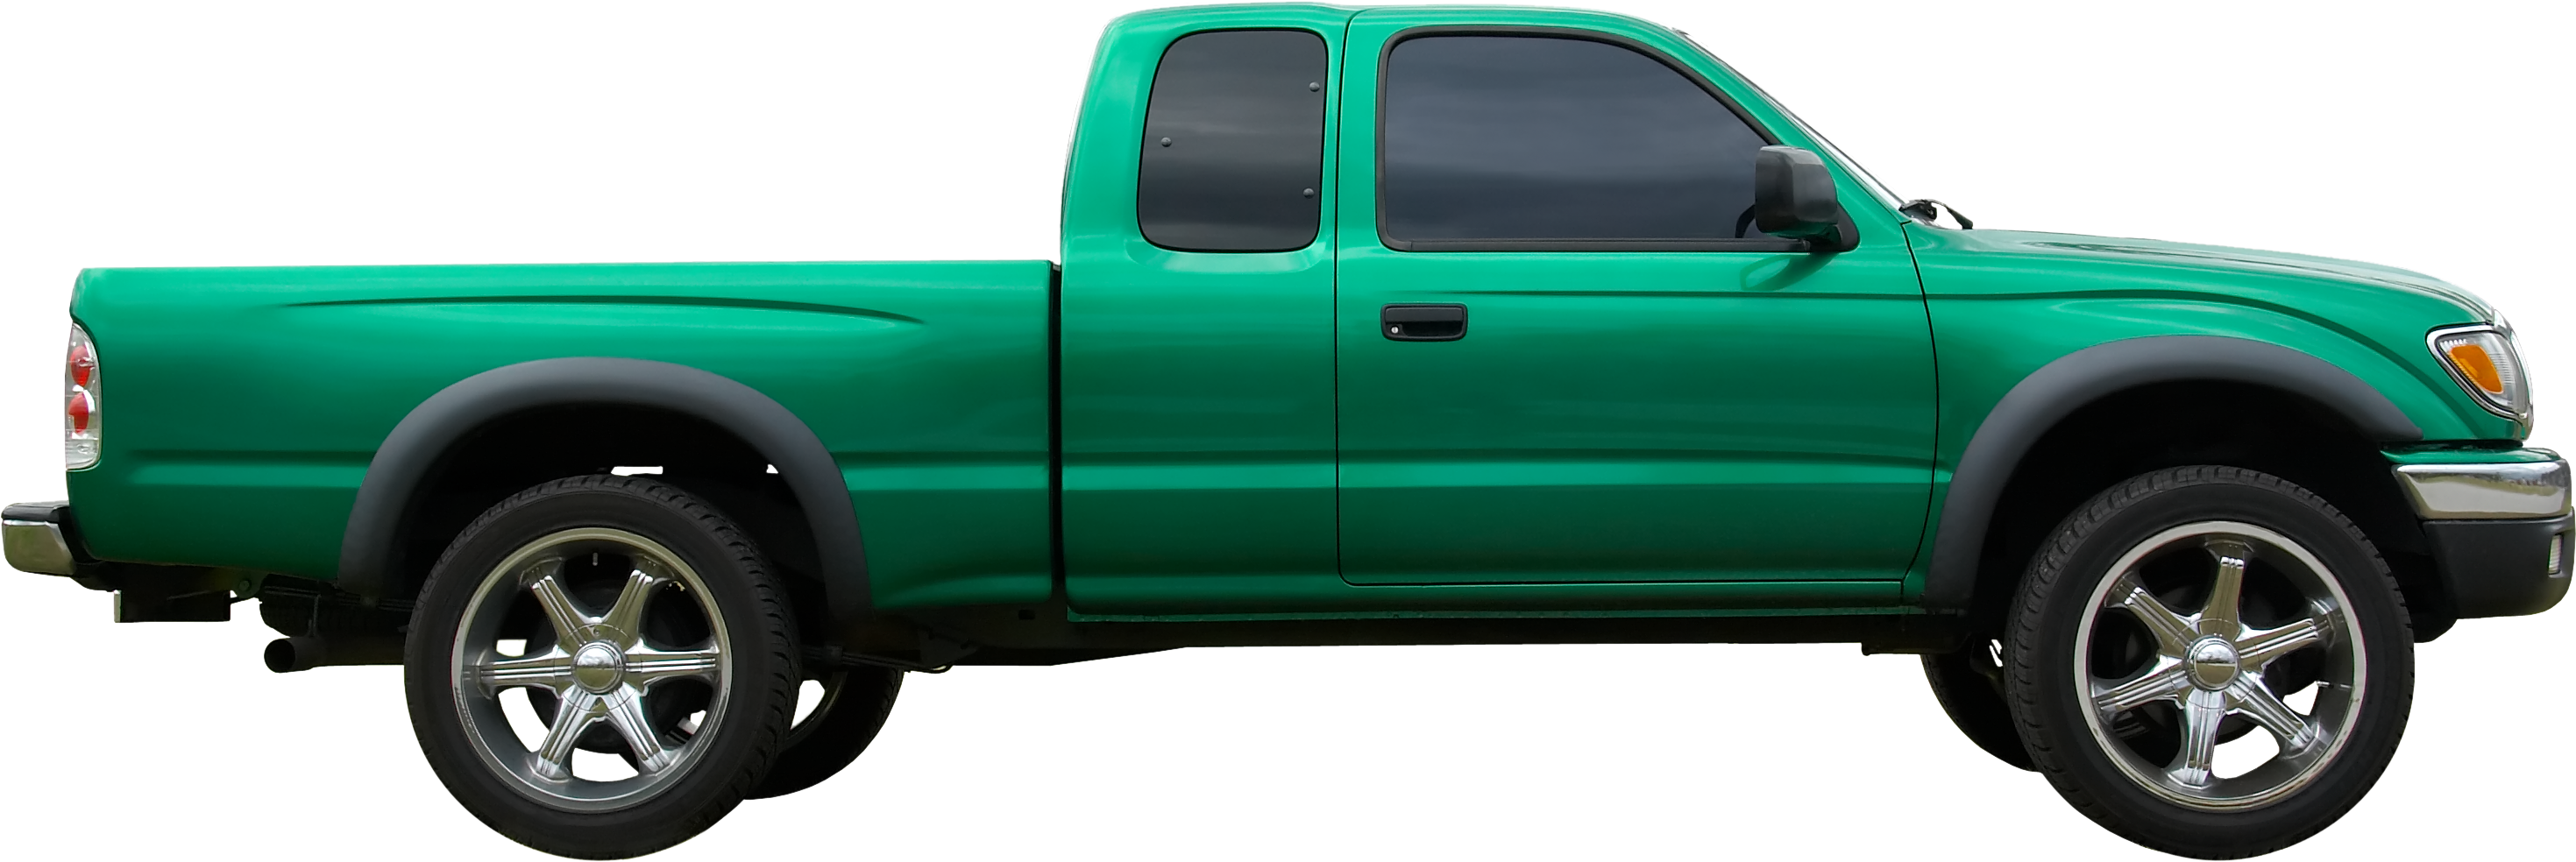 Pickup truck PNG images Download 